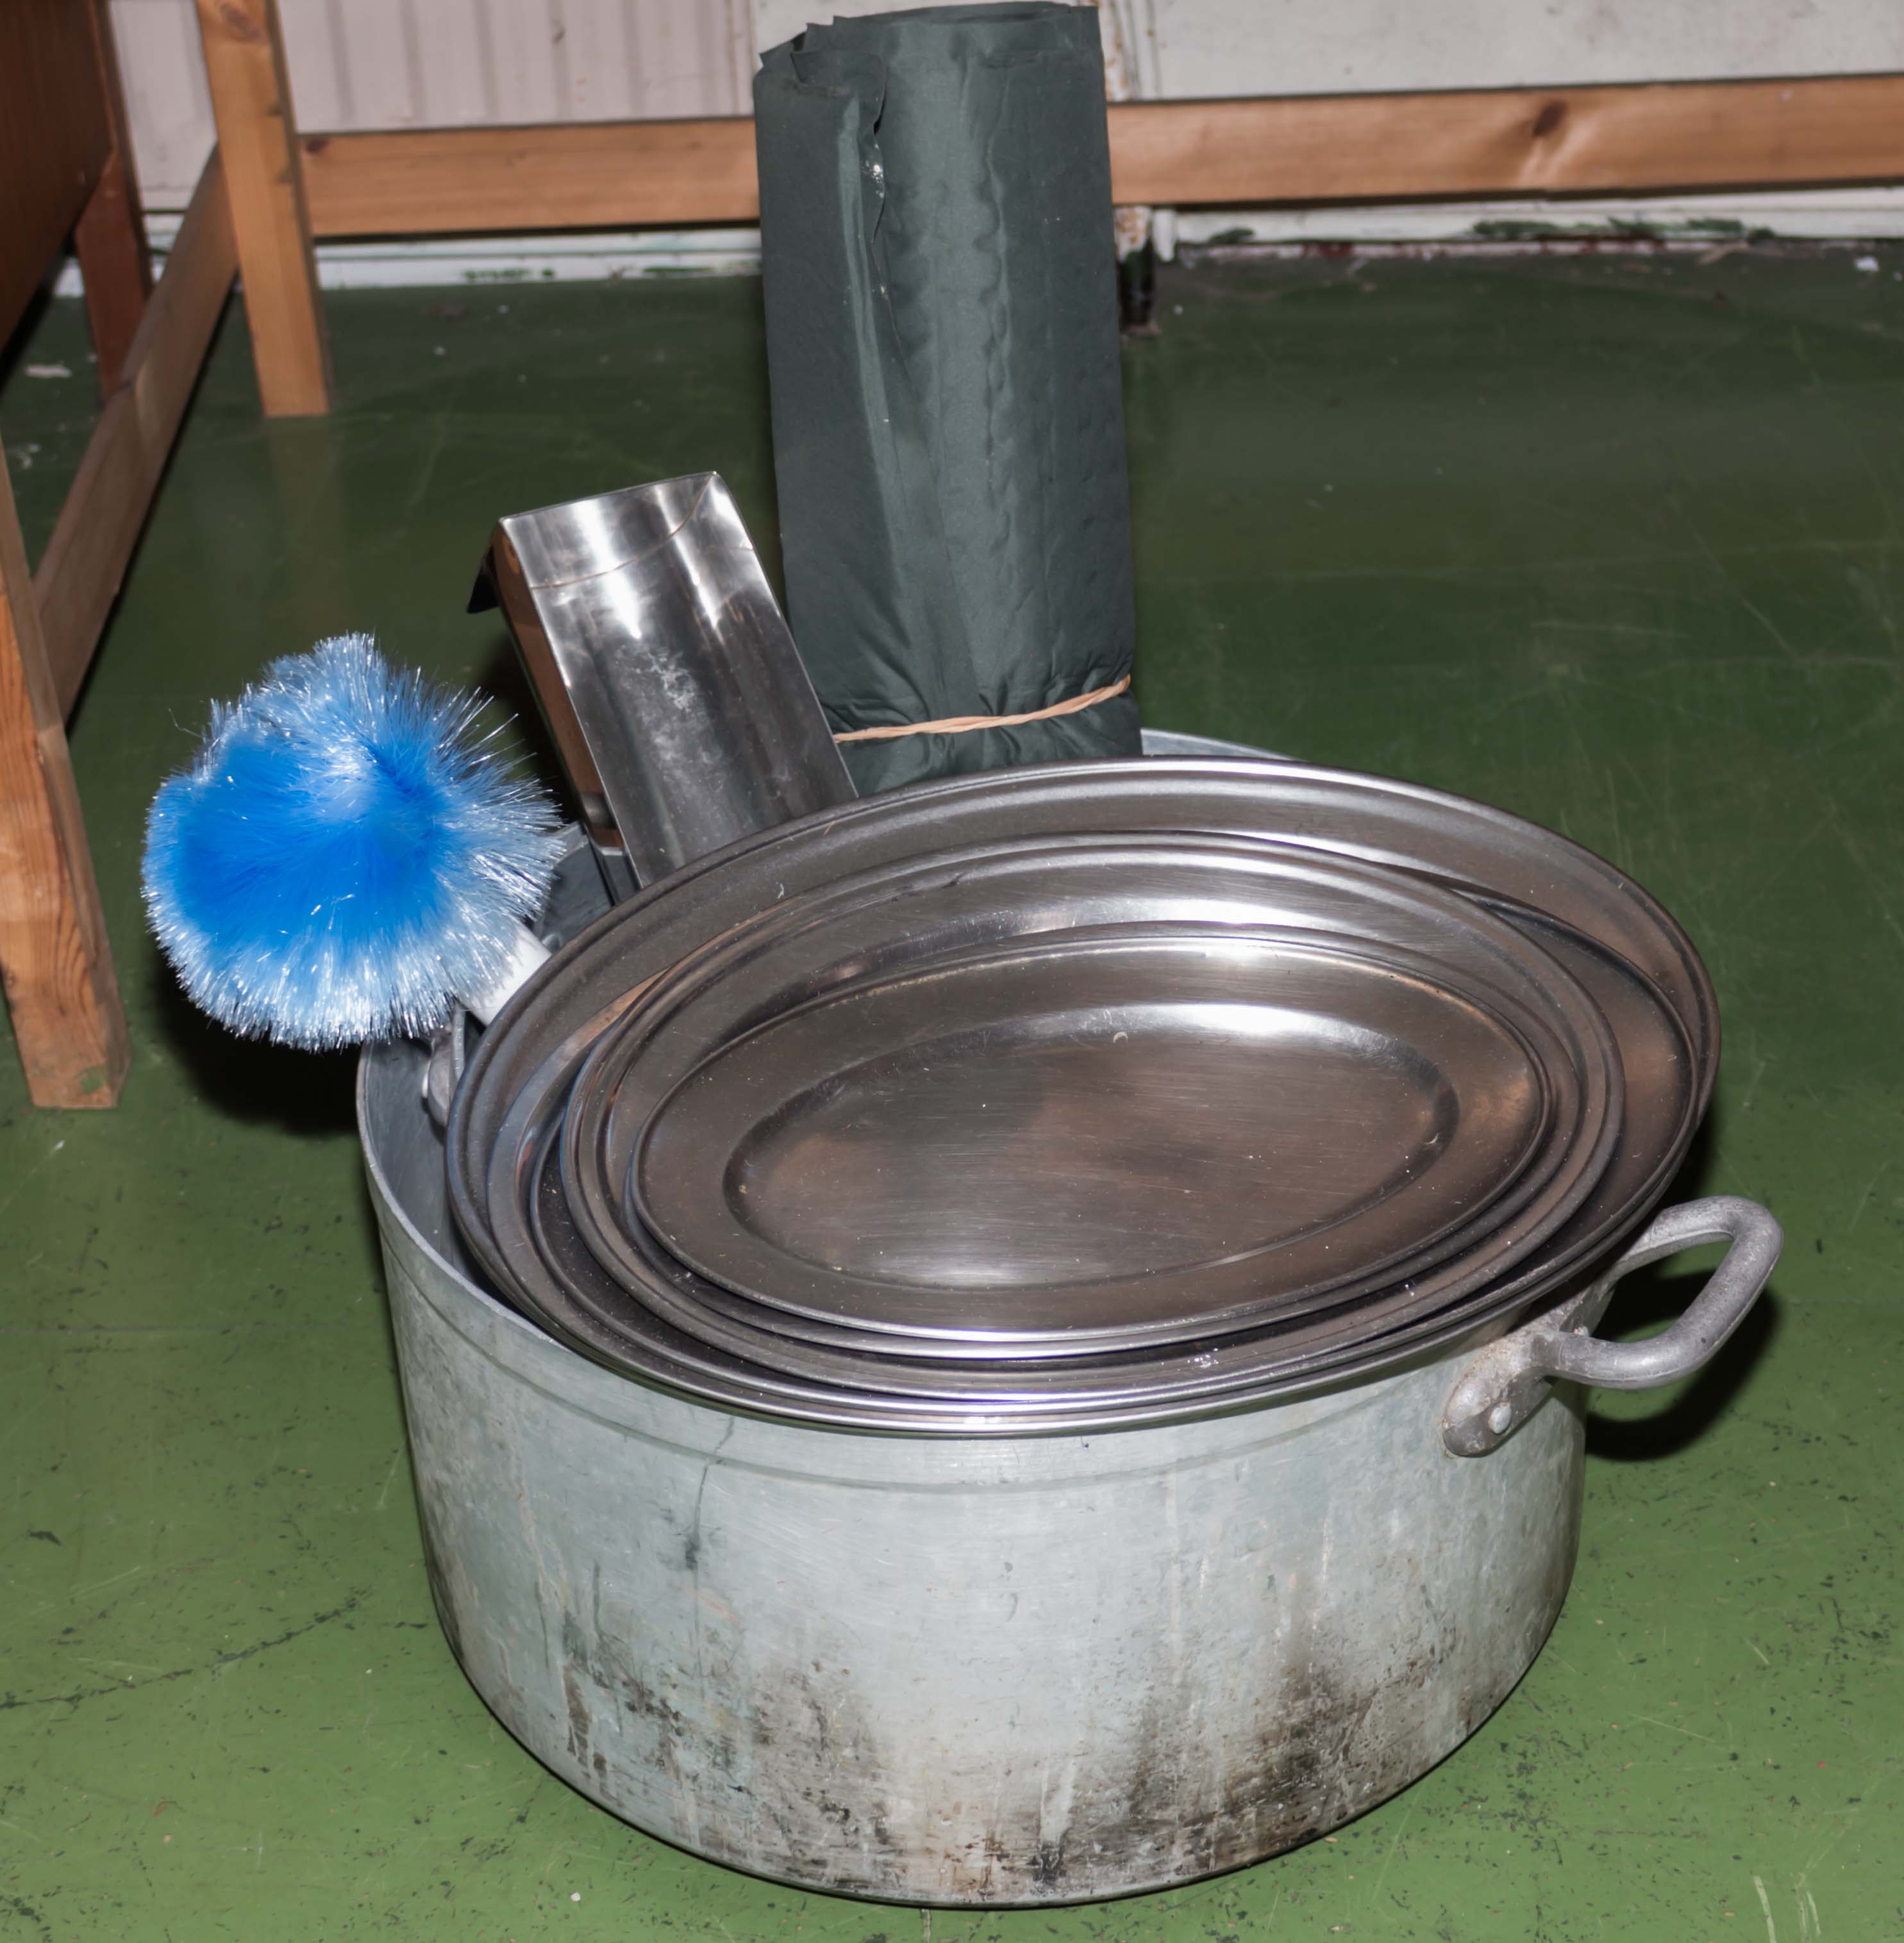 A large saucepan and serving trays